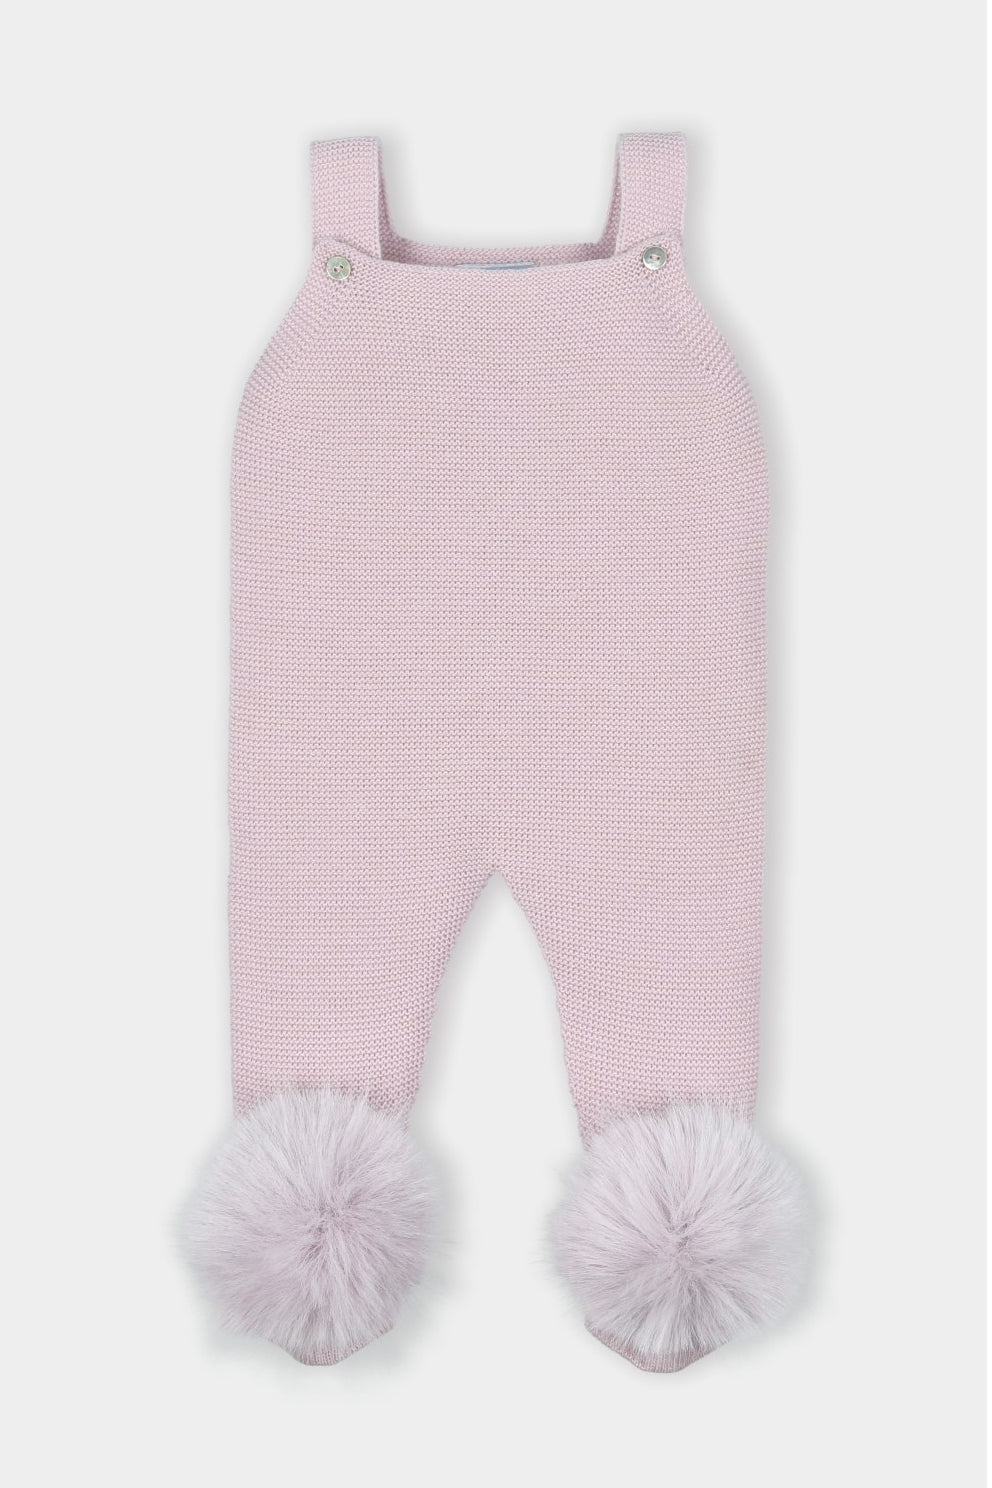 Mac Ilusión PREORDER "Eva" Knitted Dungarees | Millie and John